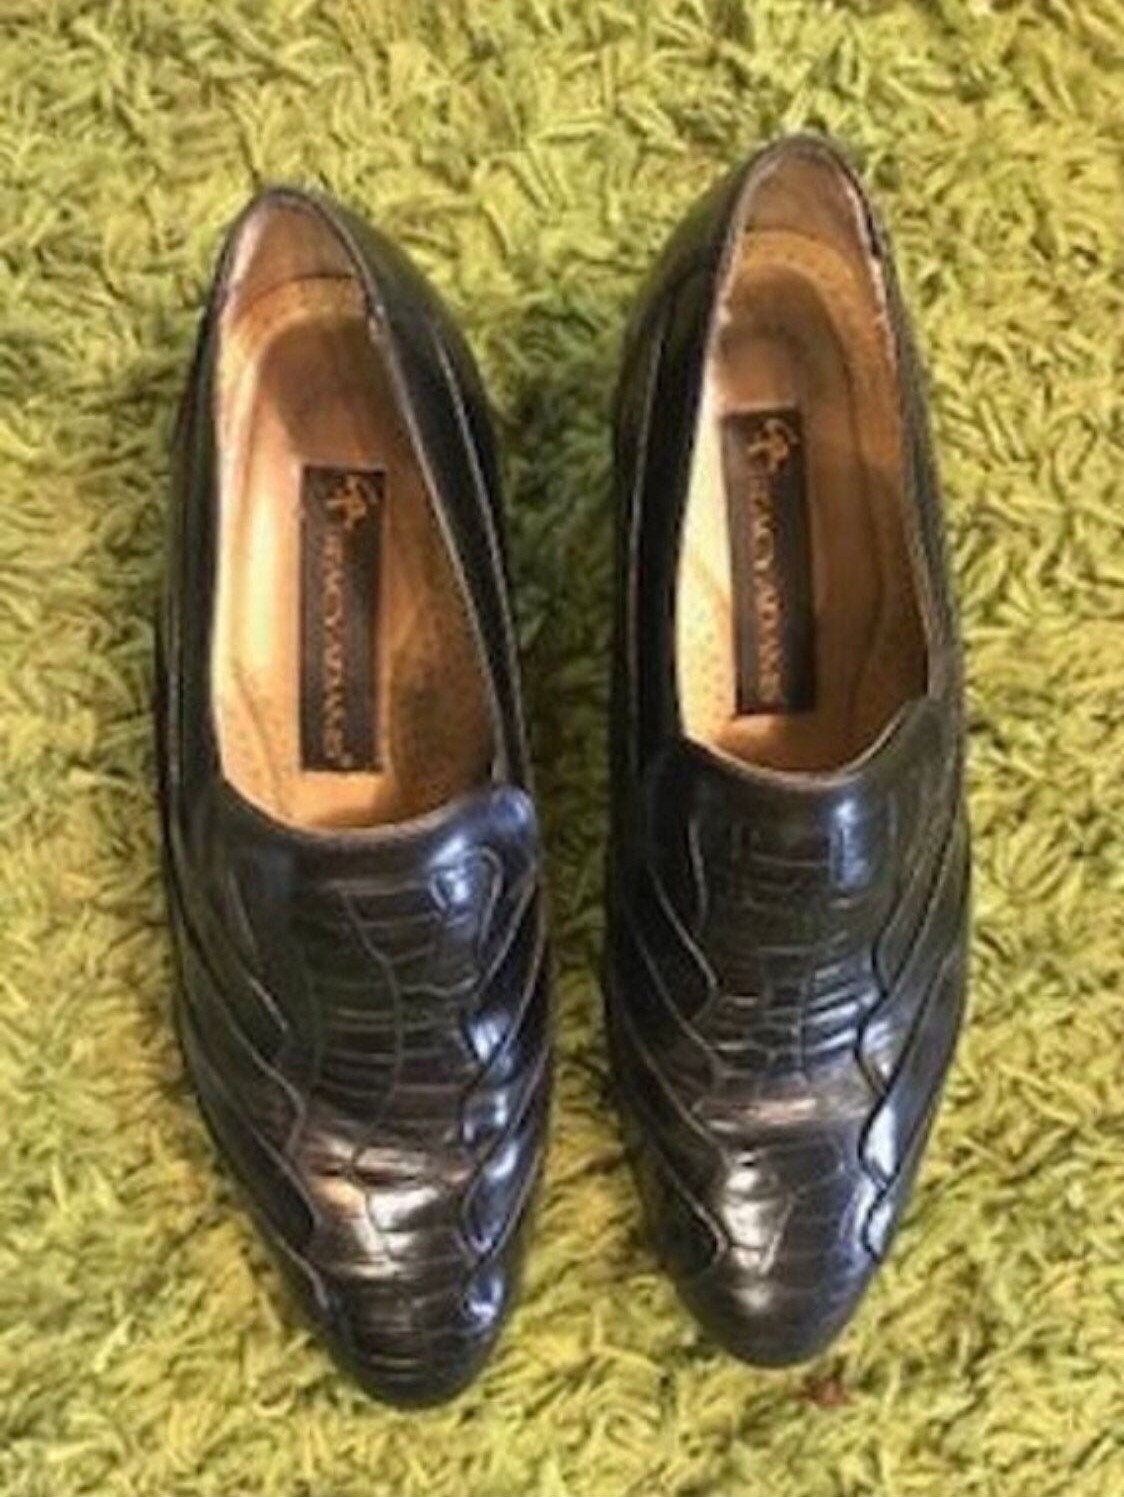 Stacy Adams Stiles Formal Loafers, Dress Shoes